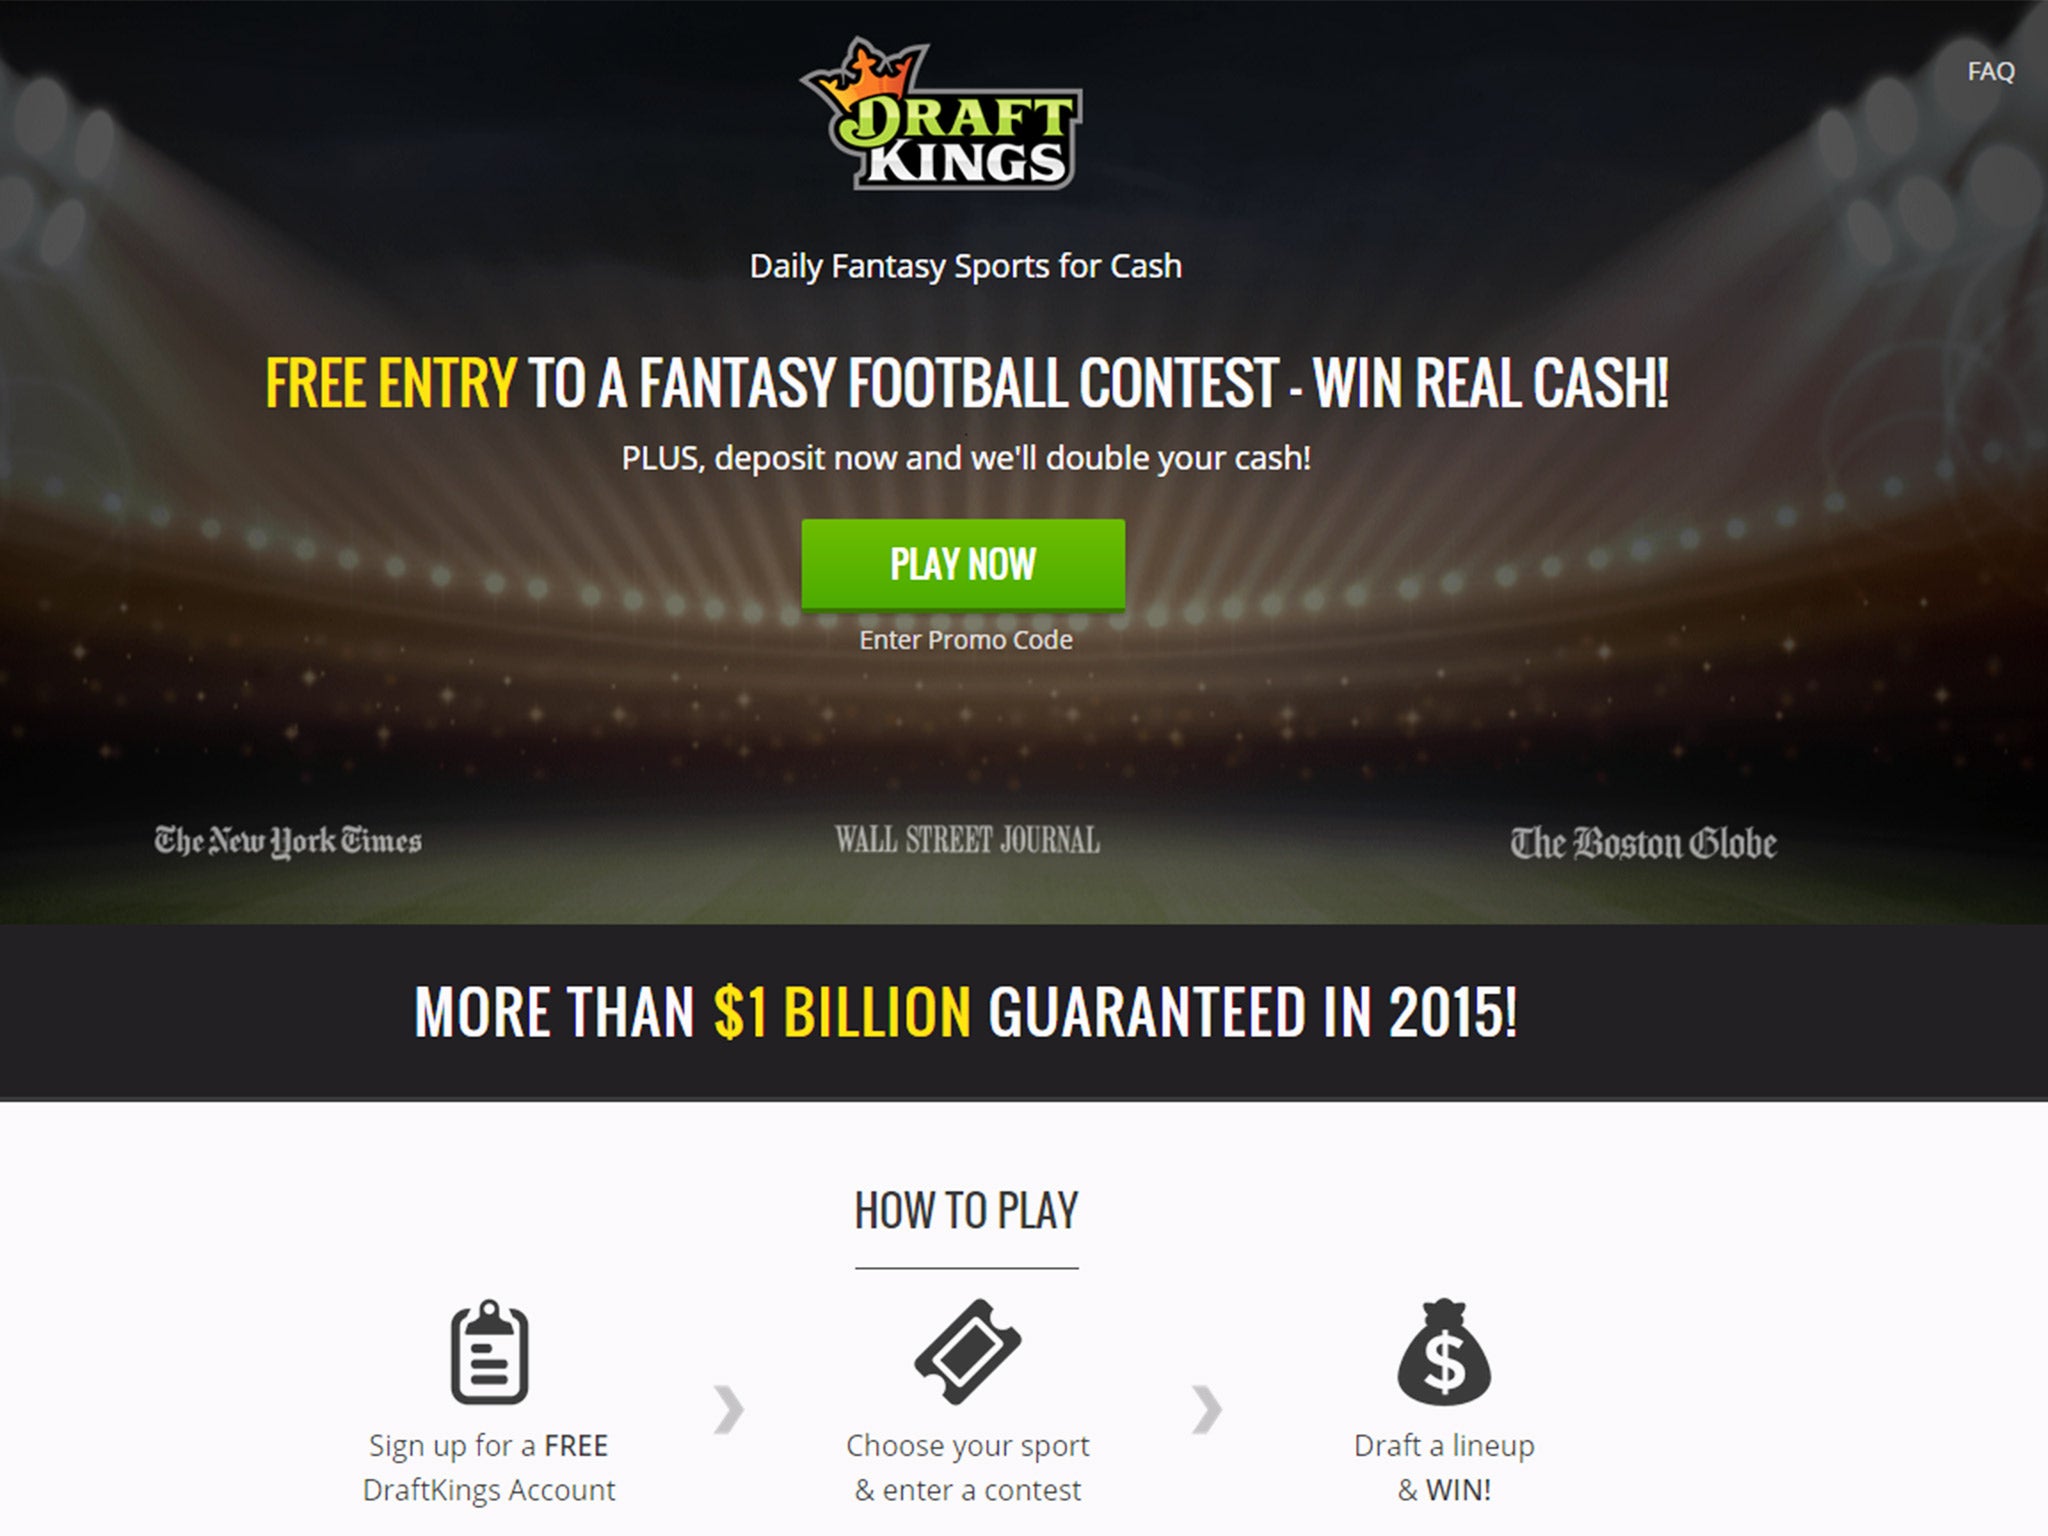 The Draft Kings website. Players can win cash by selecting NFL players they expect to perform well